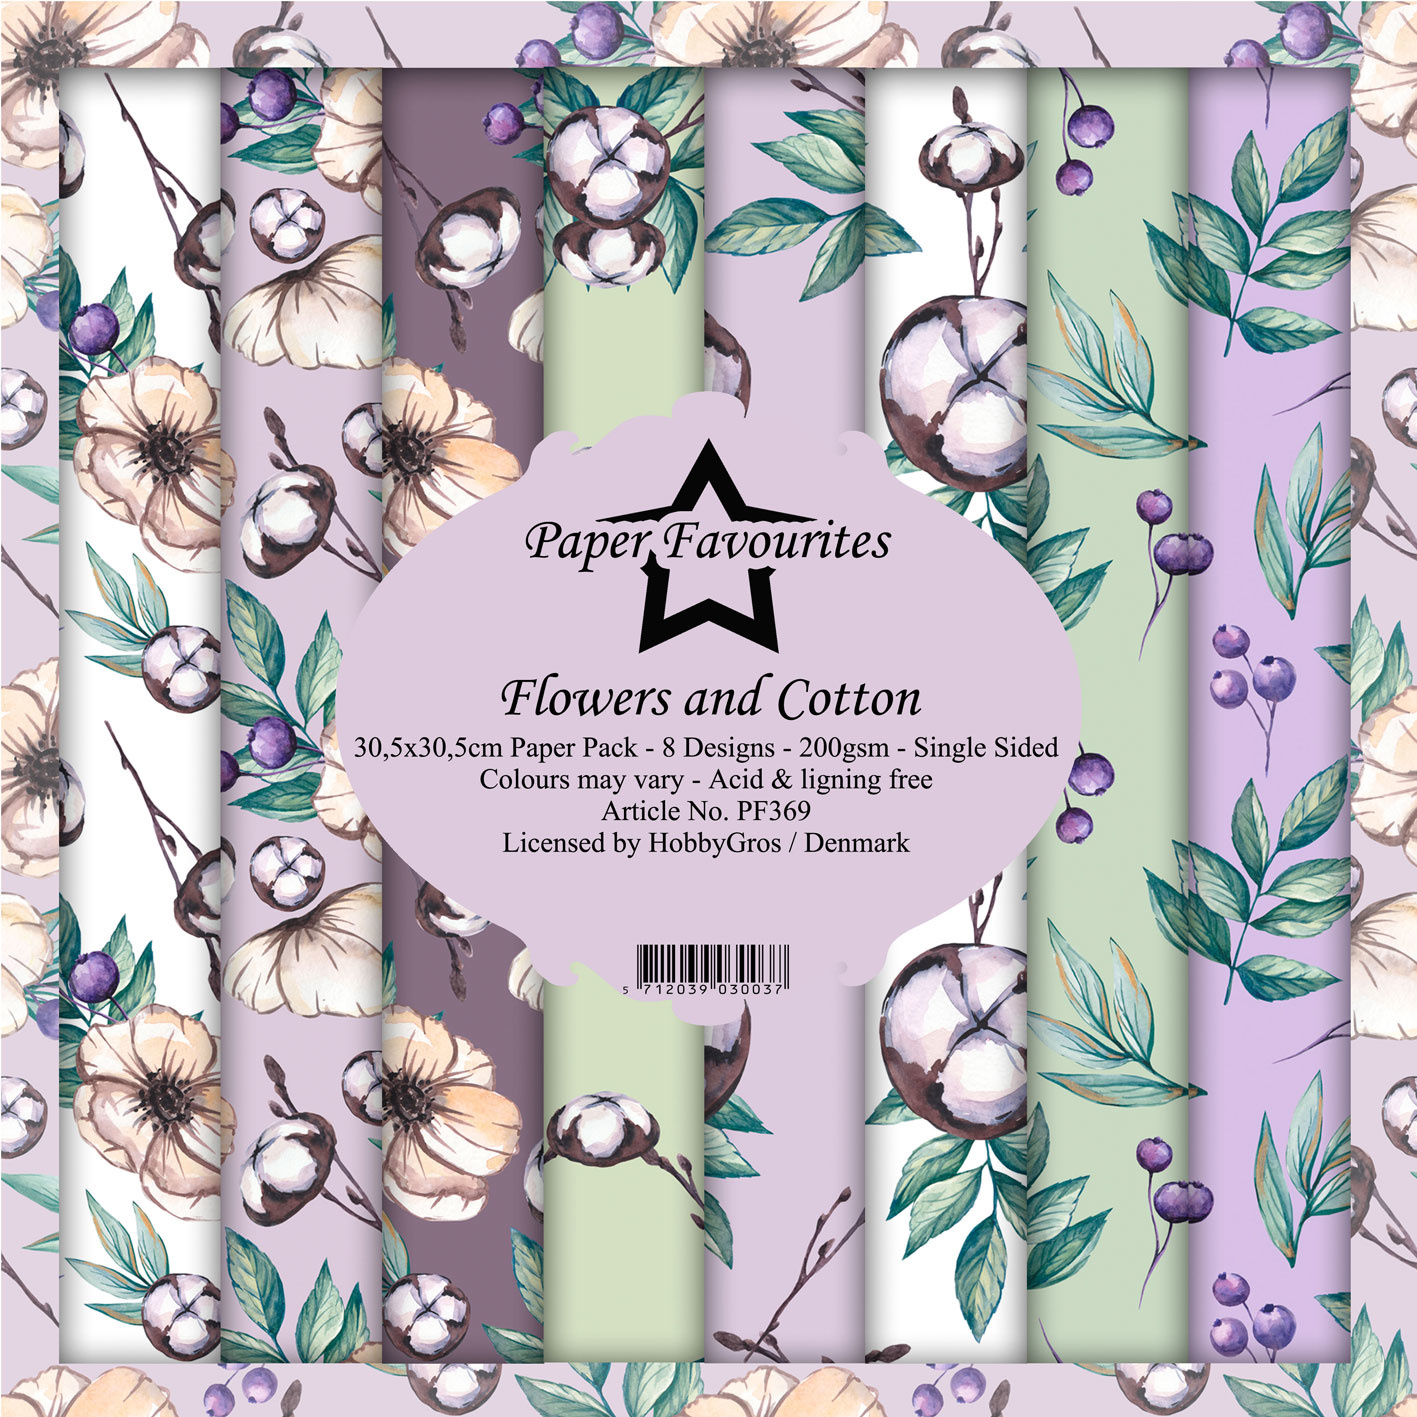 paper-favourites-flowers-and-cotton-12x12-inch-pap